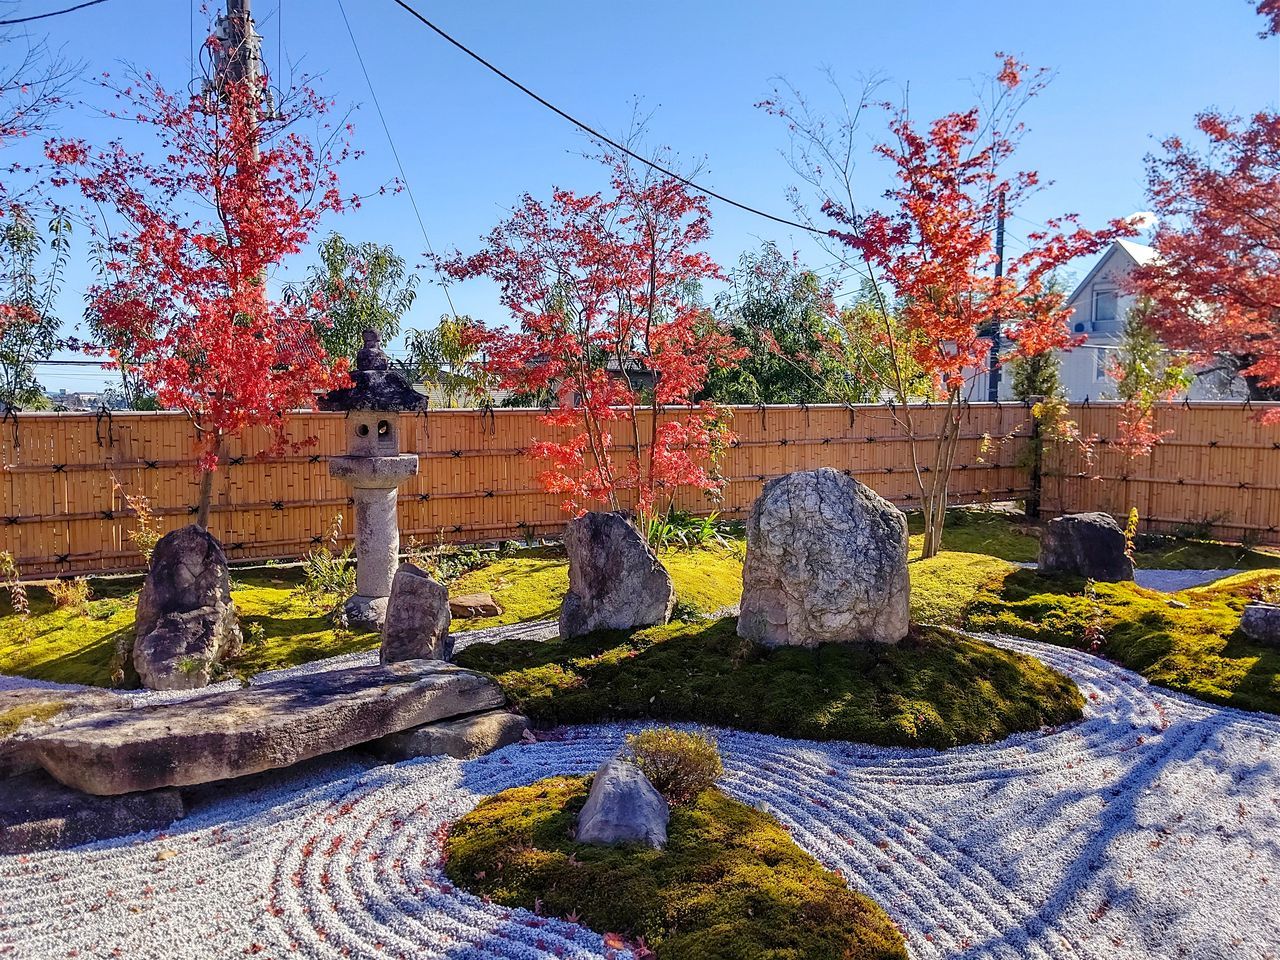 plant, nature, architecture, autumn, sky, tree, no people, flower, history, the past, day, garden, religion, built structure, landscape, cemetery, outdoors, grave, travel destinations, stone material, clear sky, sunlight, memorial, blue, sunny, travel, belief, leaf, stone, ancient, wall, multi colored